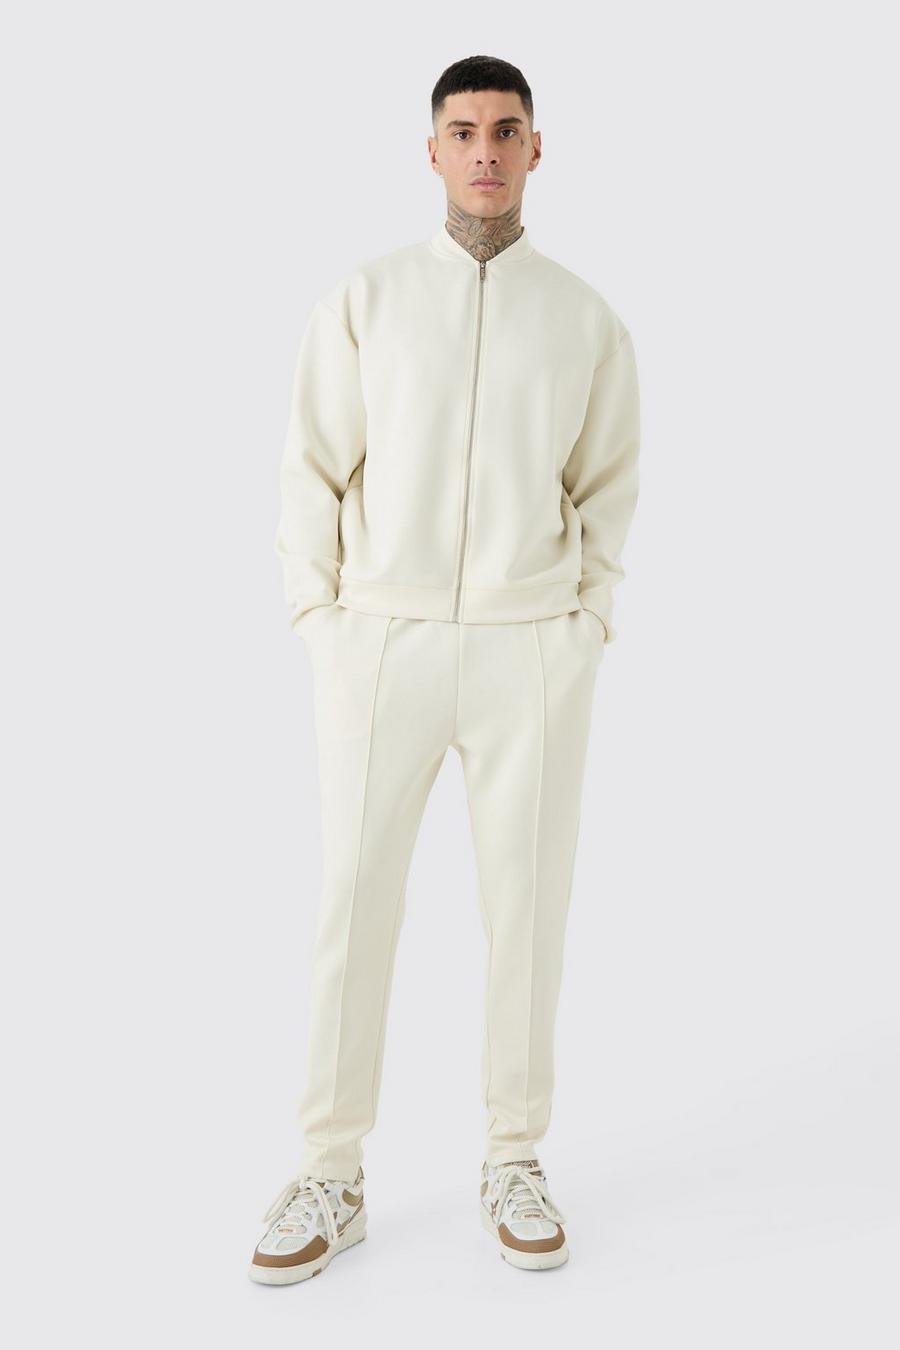 Mens Tall Tracksuits, Tracksuits For Tall Men